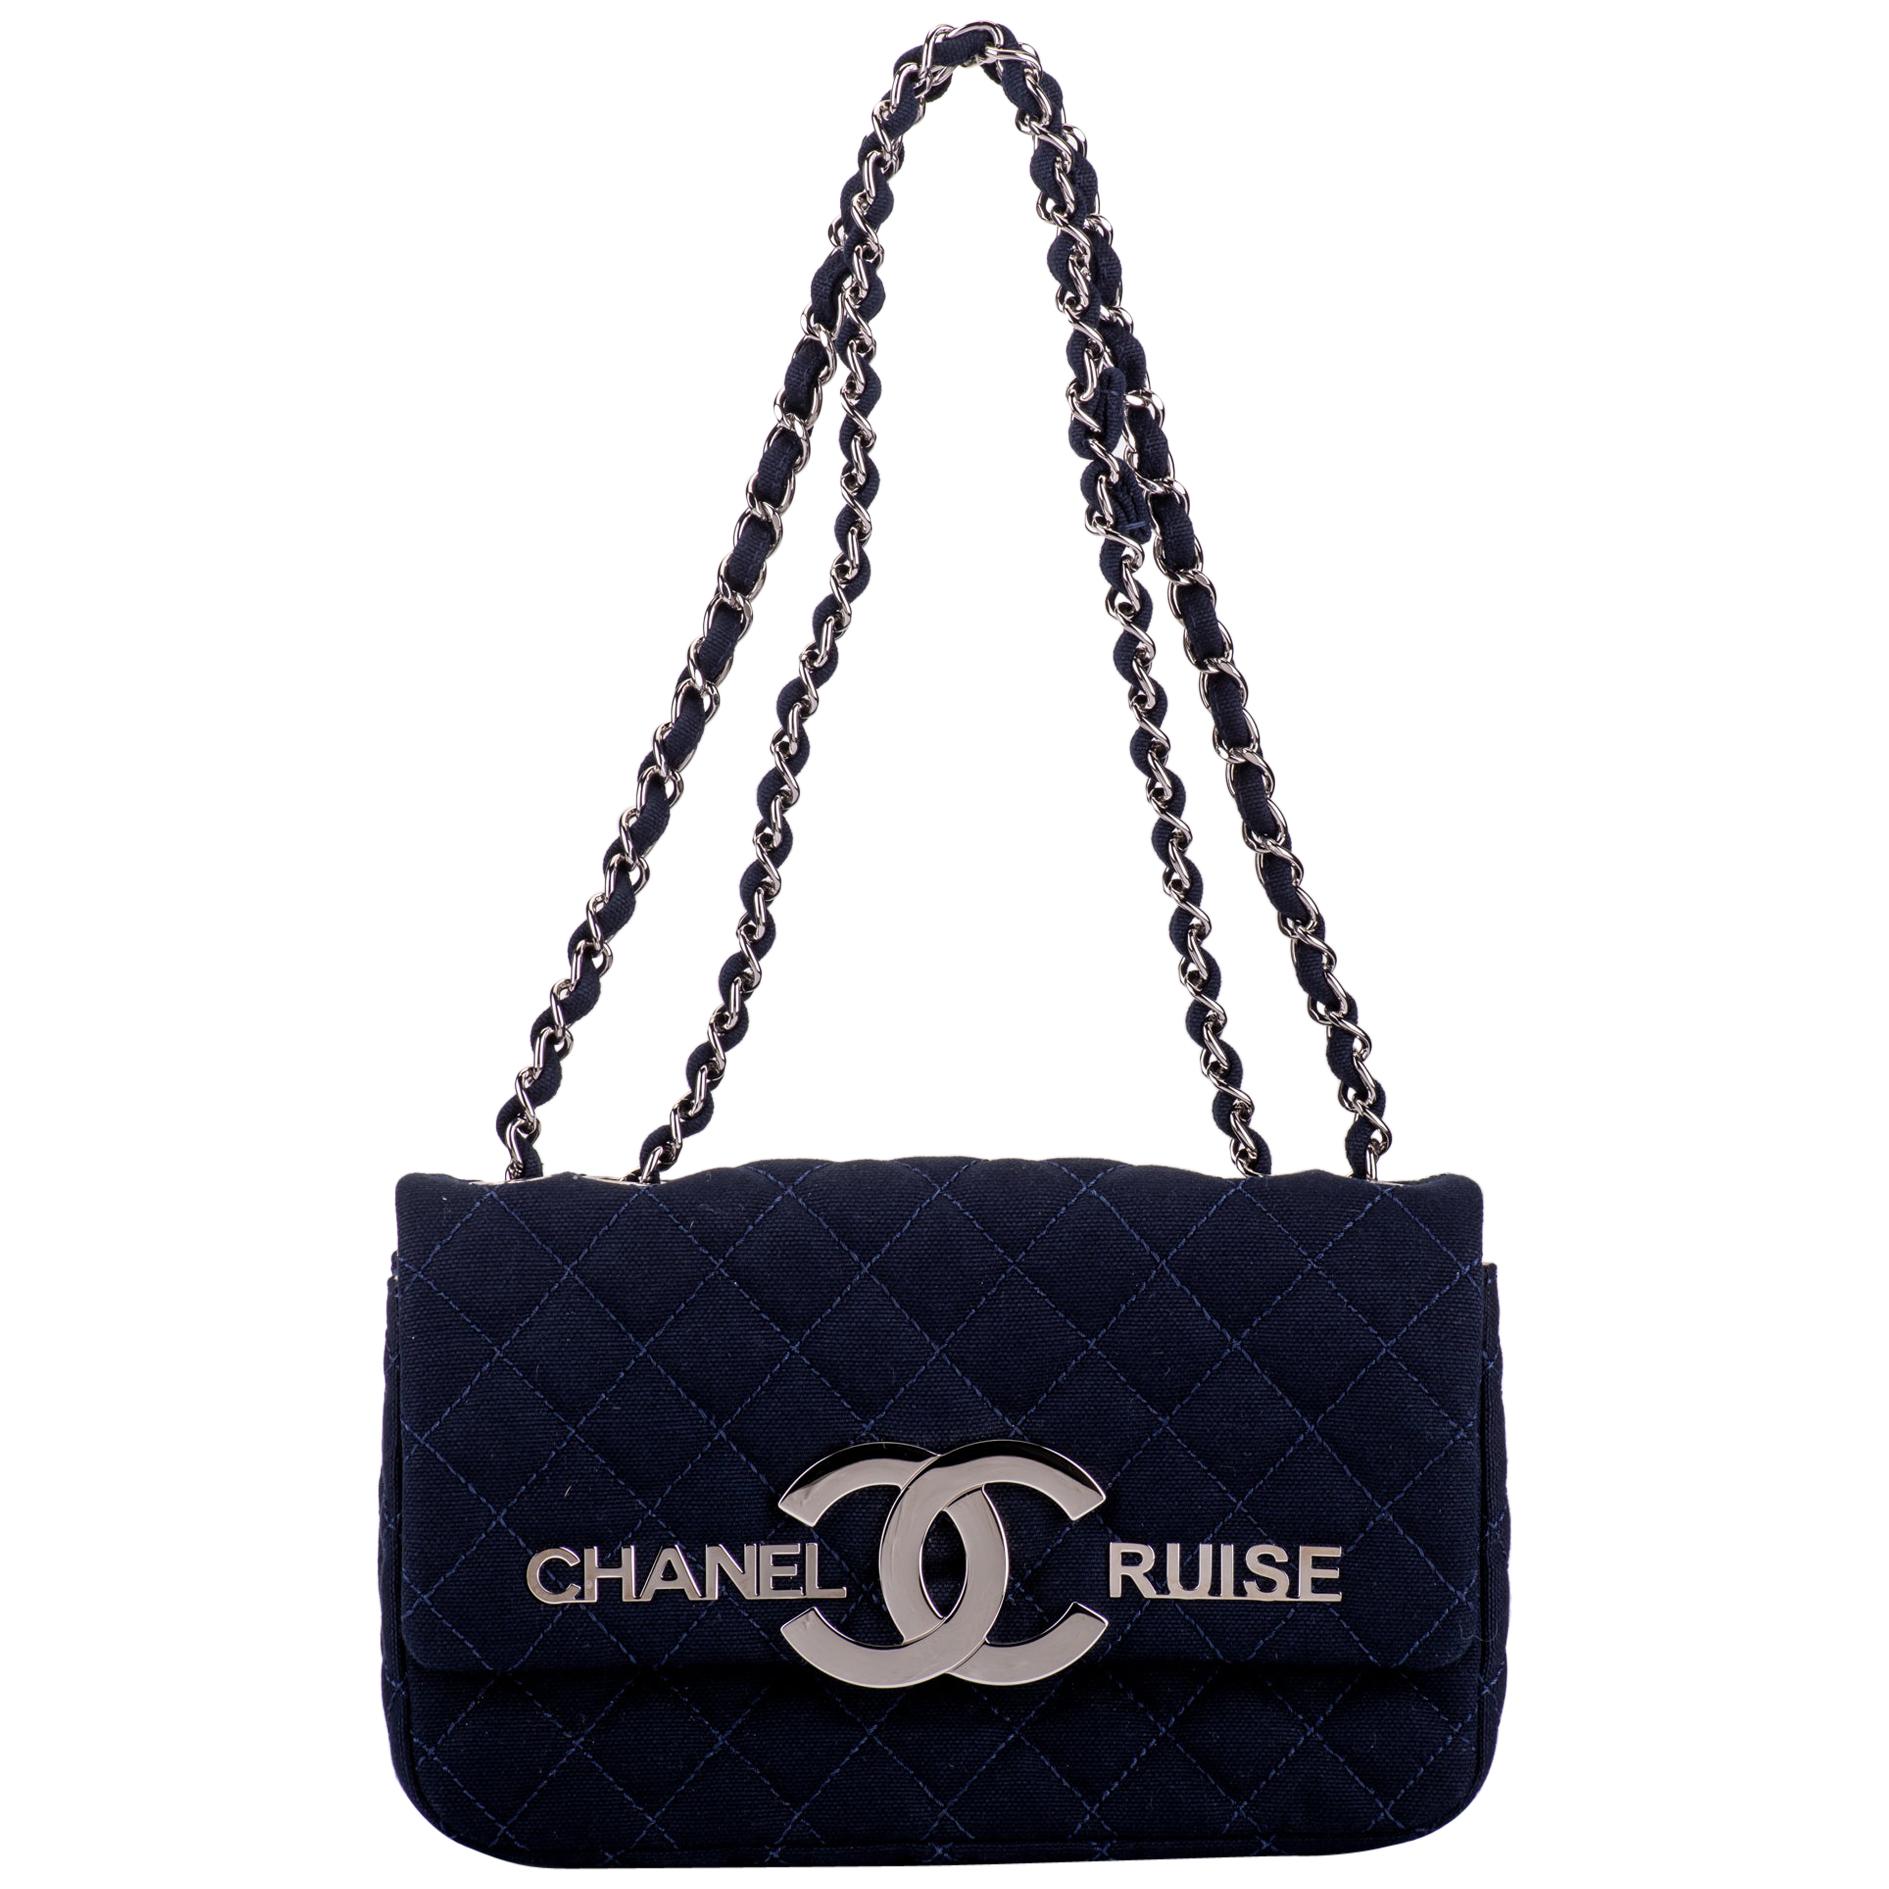 New in Box Chanel Rare Navy Cruise Flap Bag